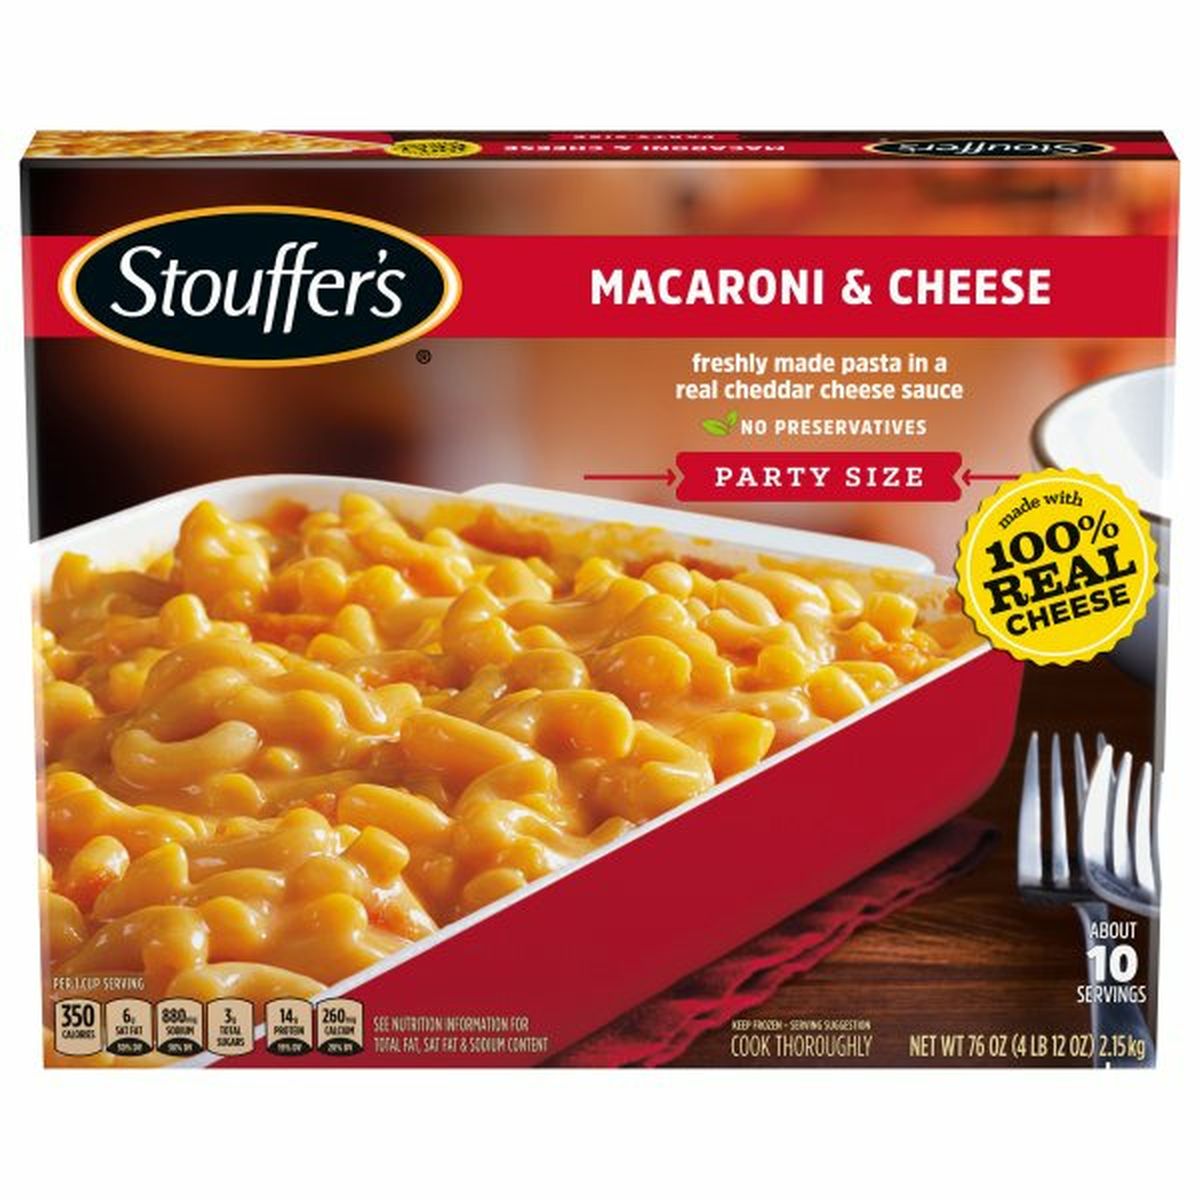 Calories in Stouffer's Macaroni & Cheese, Party Size